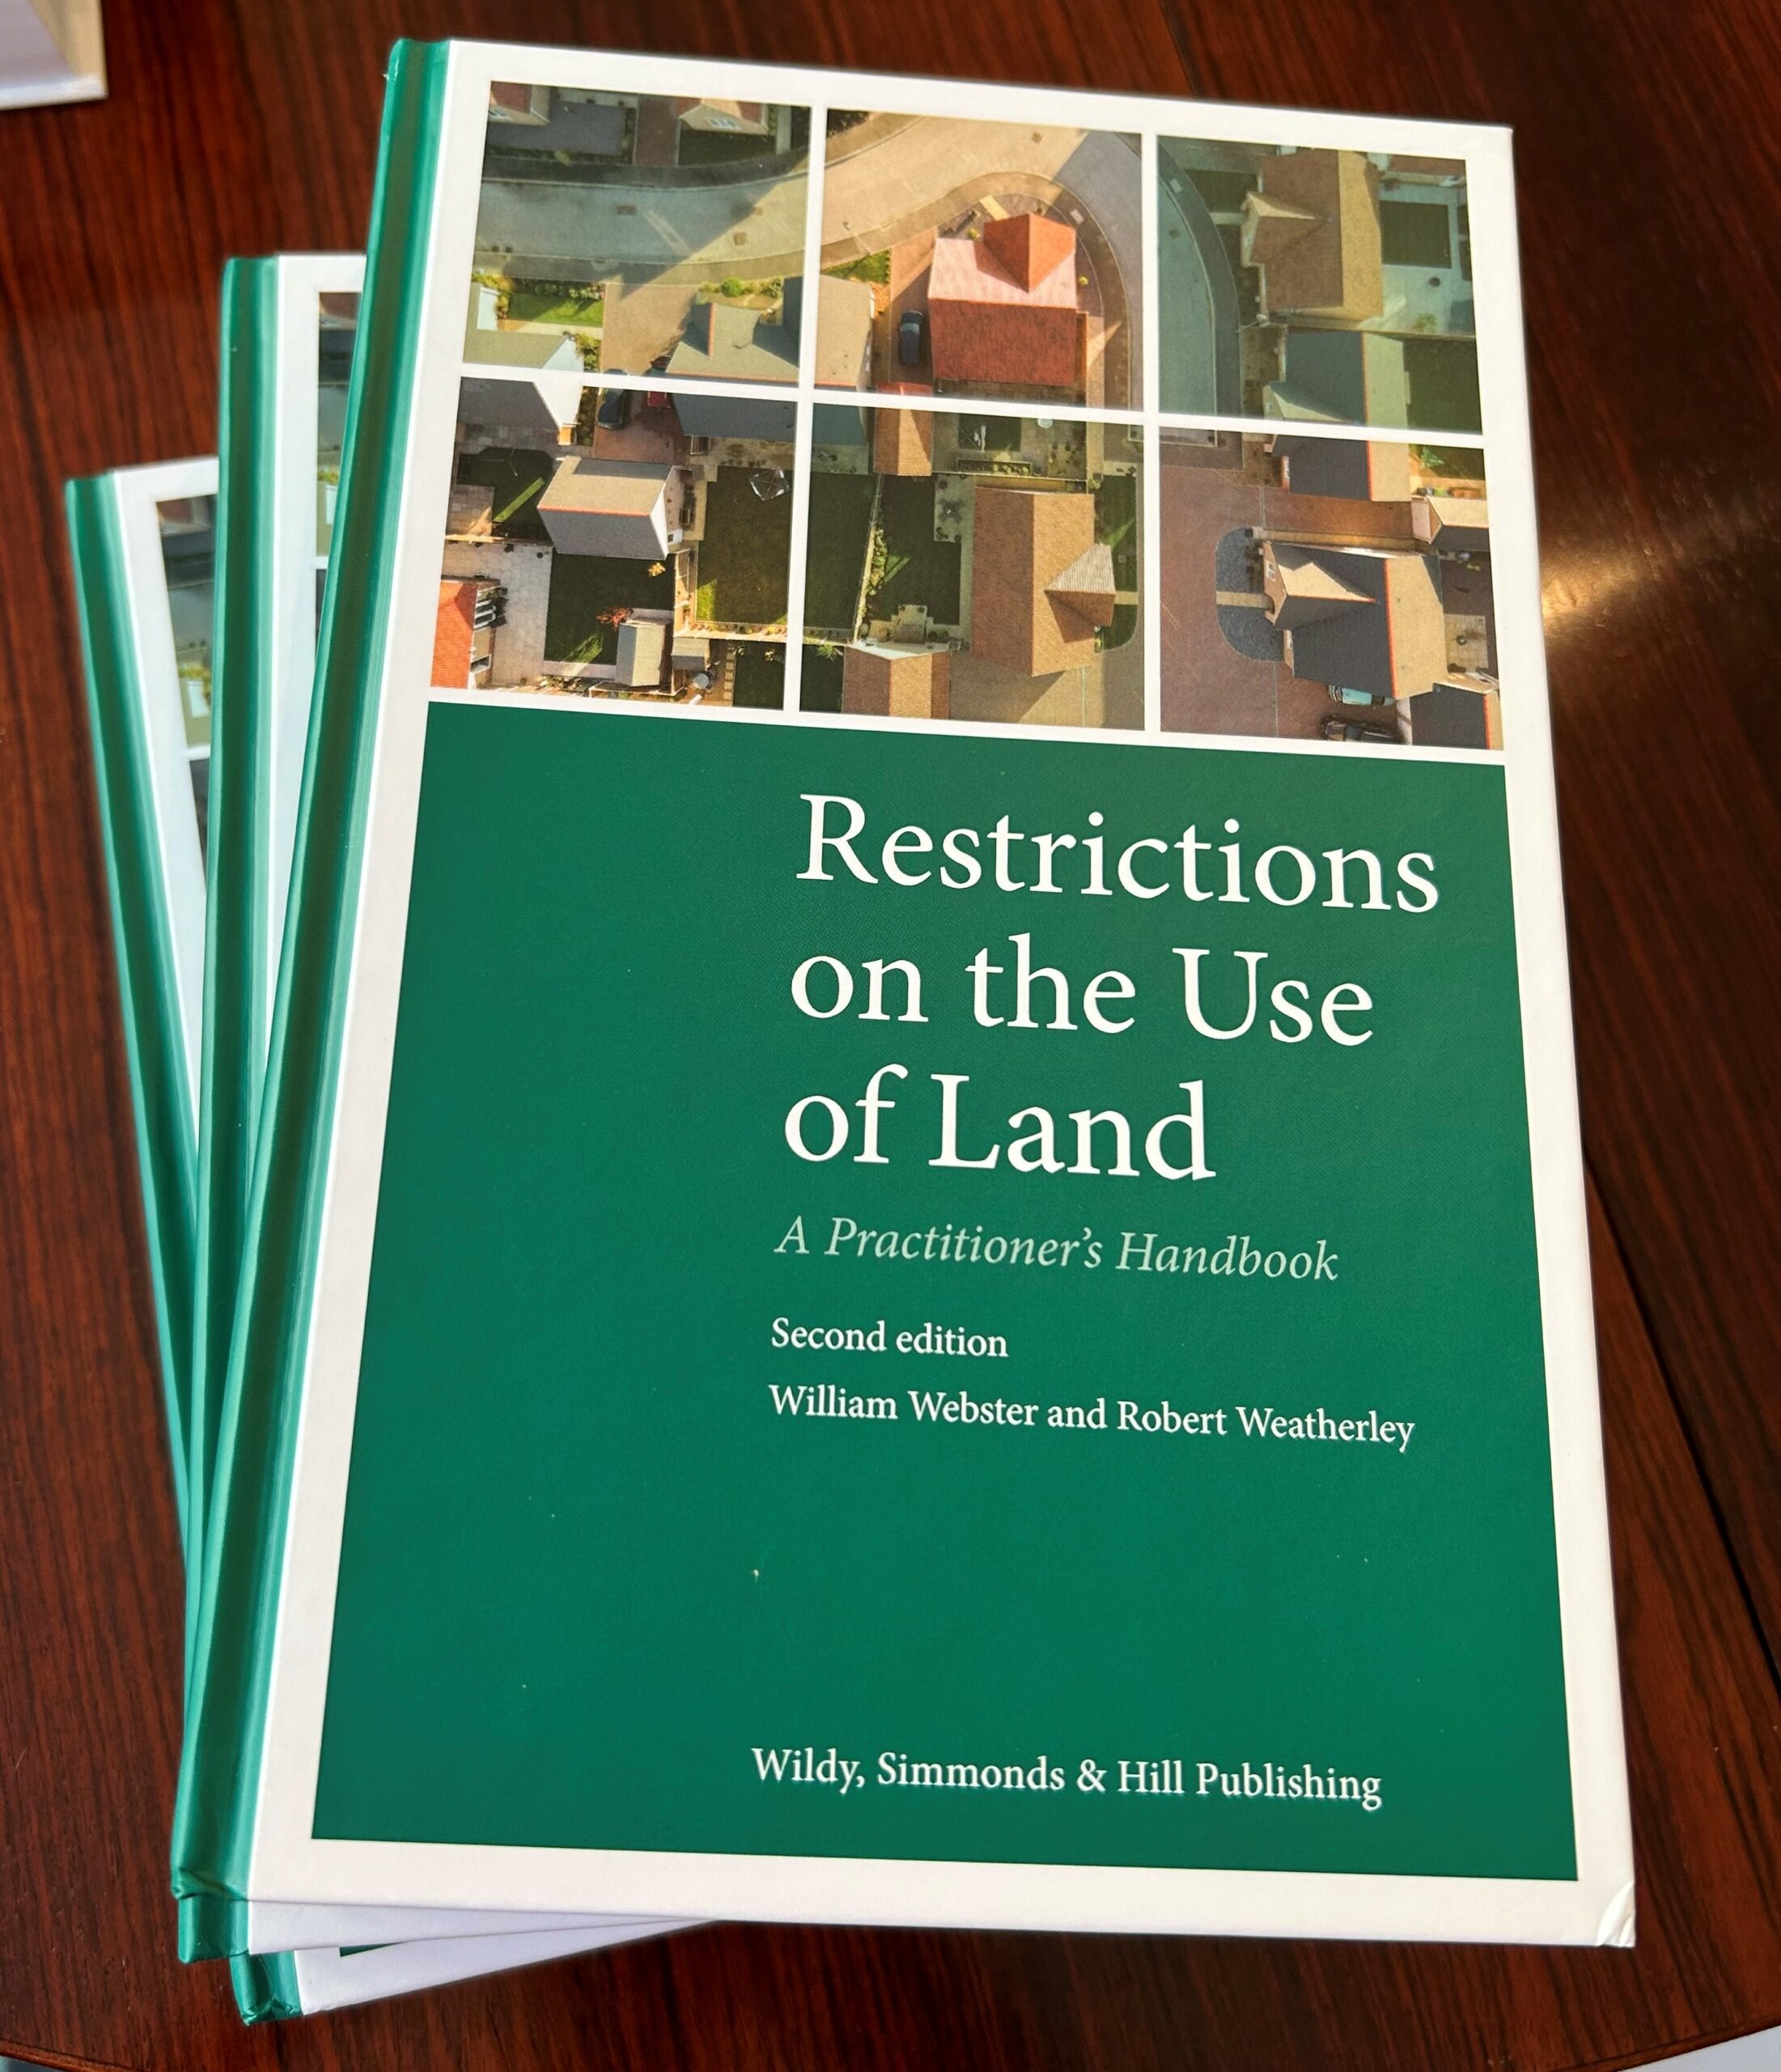 Restrictions on the Use of Land scaled